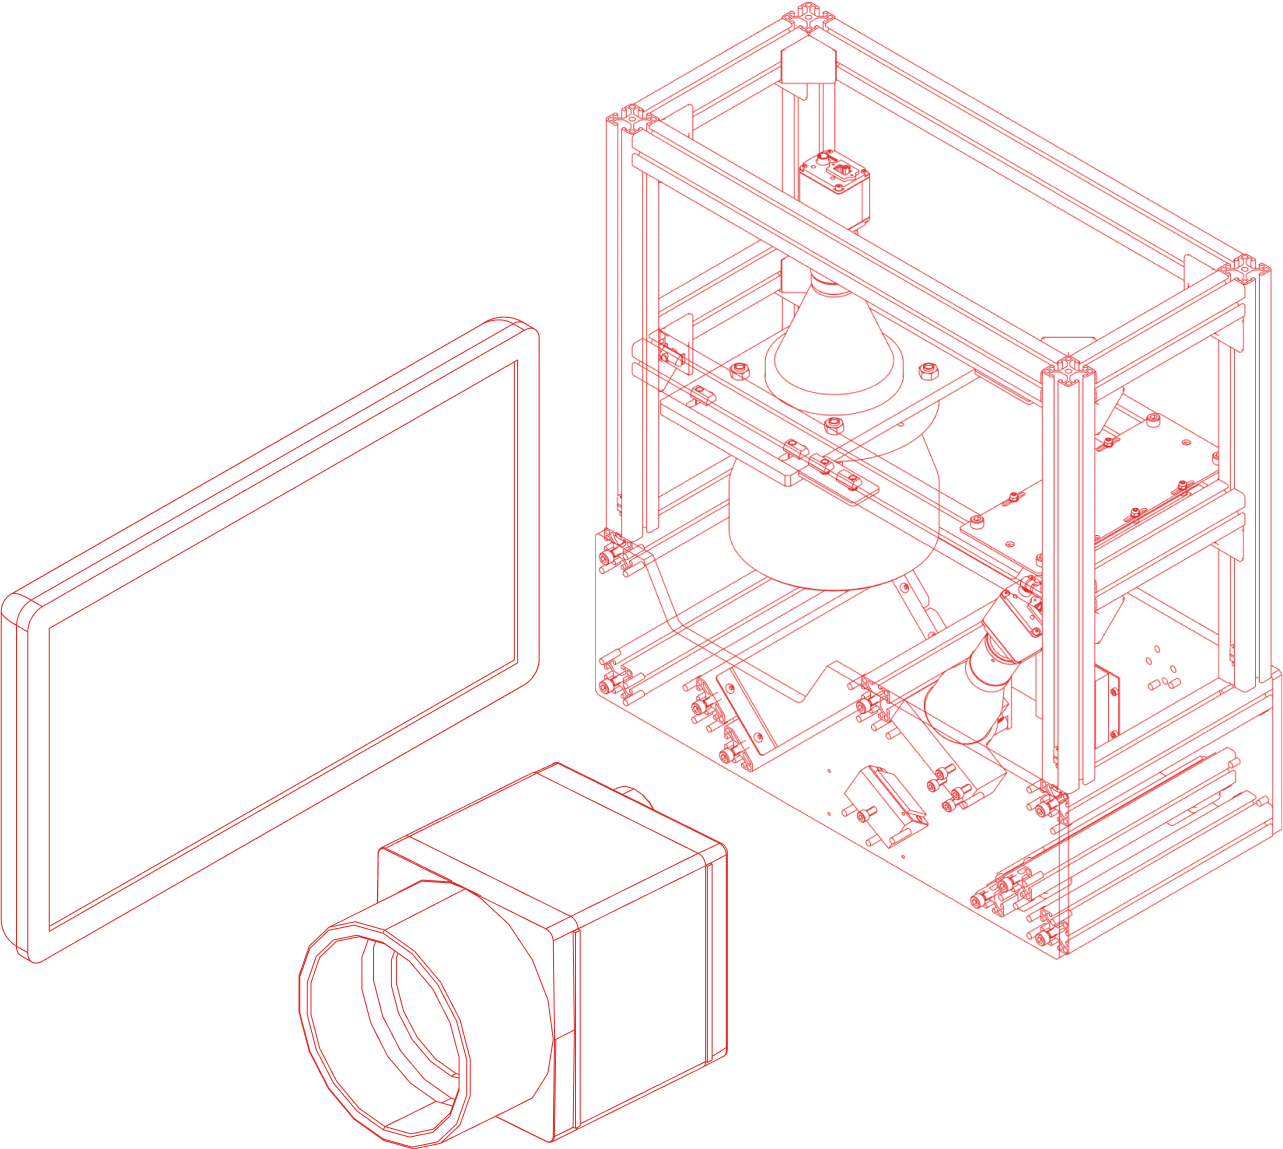 wireframe of camera, touchscreen and mechanical handling system